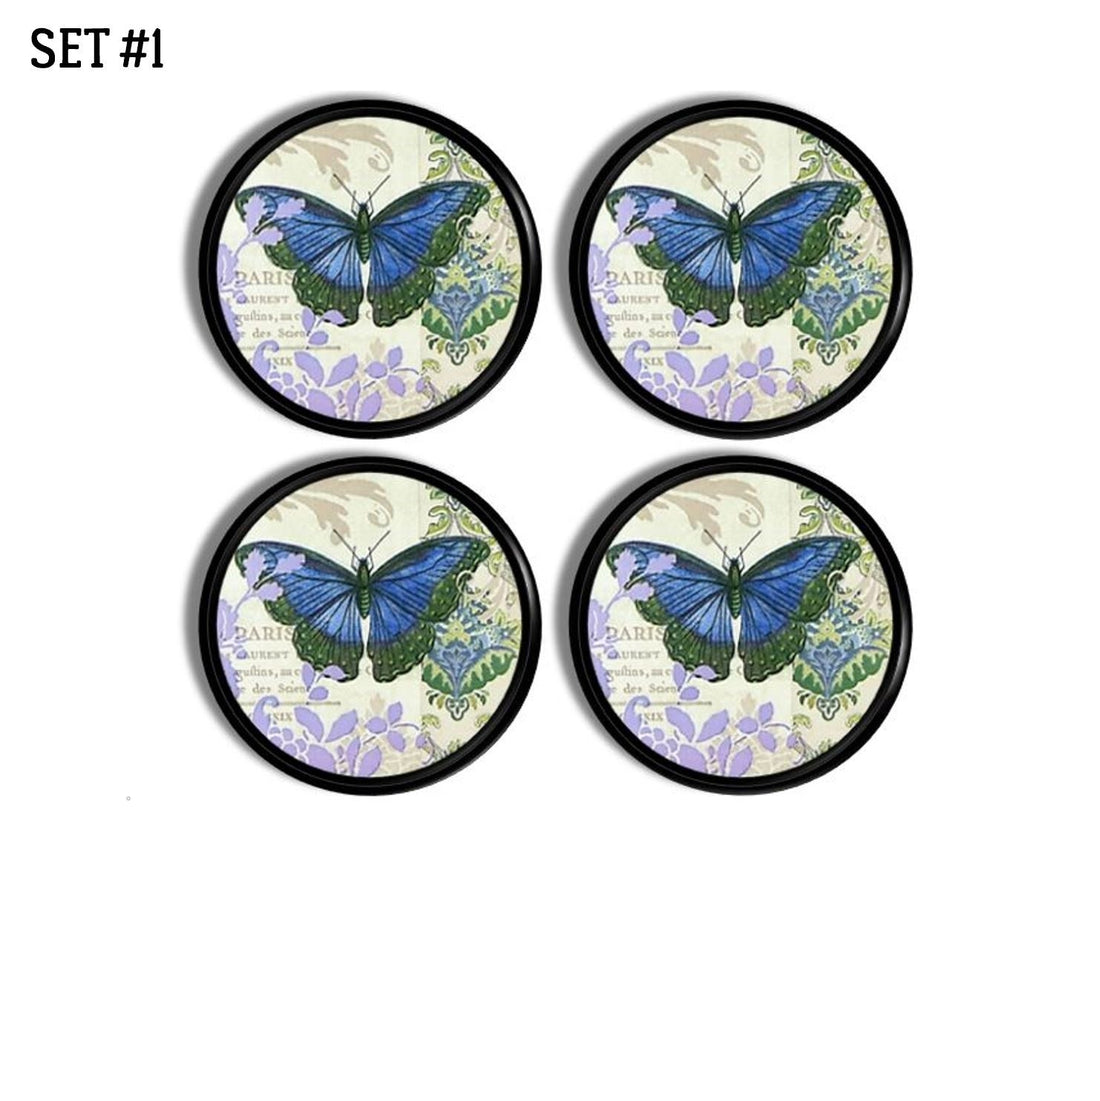 Four butterfly garden themed dresser drawer pulls. Country French or bohemian home decor hardware.